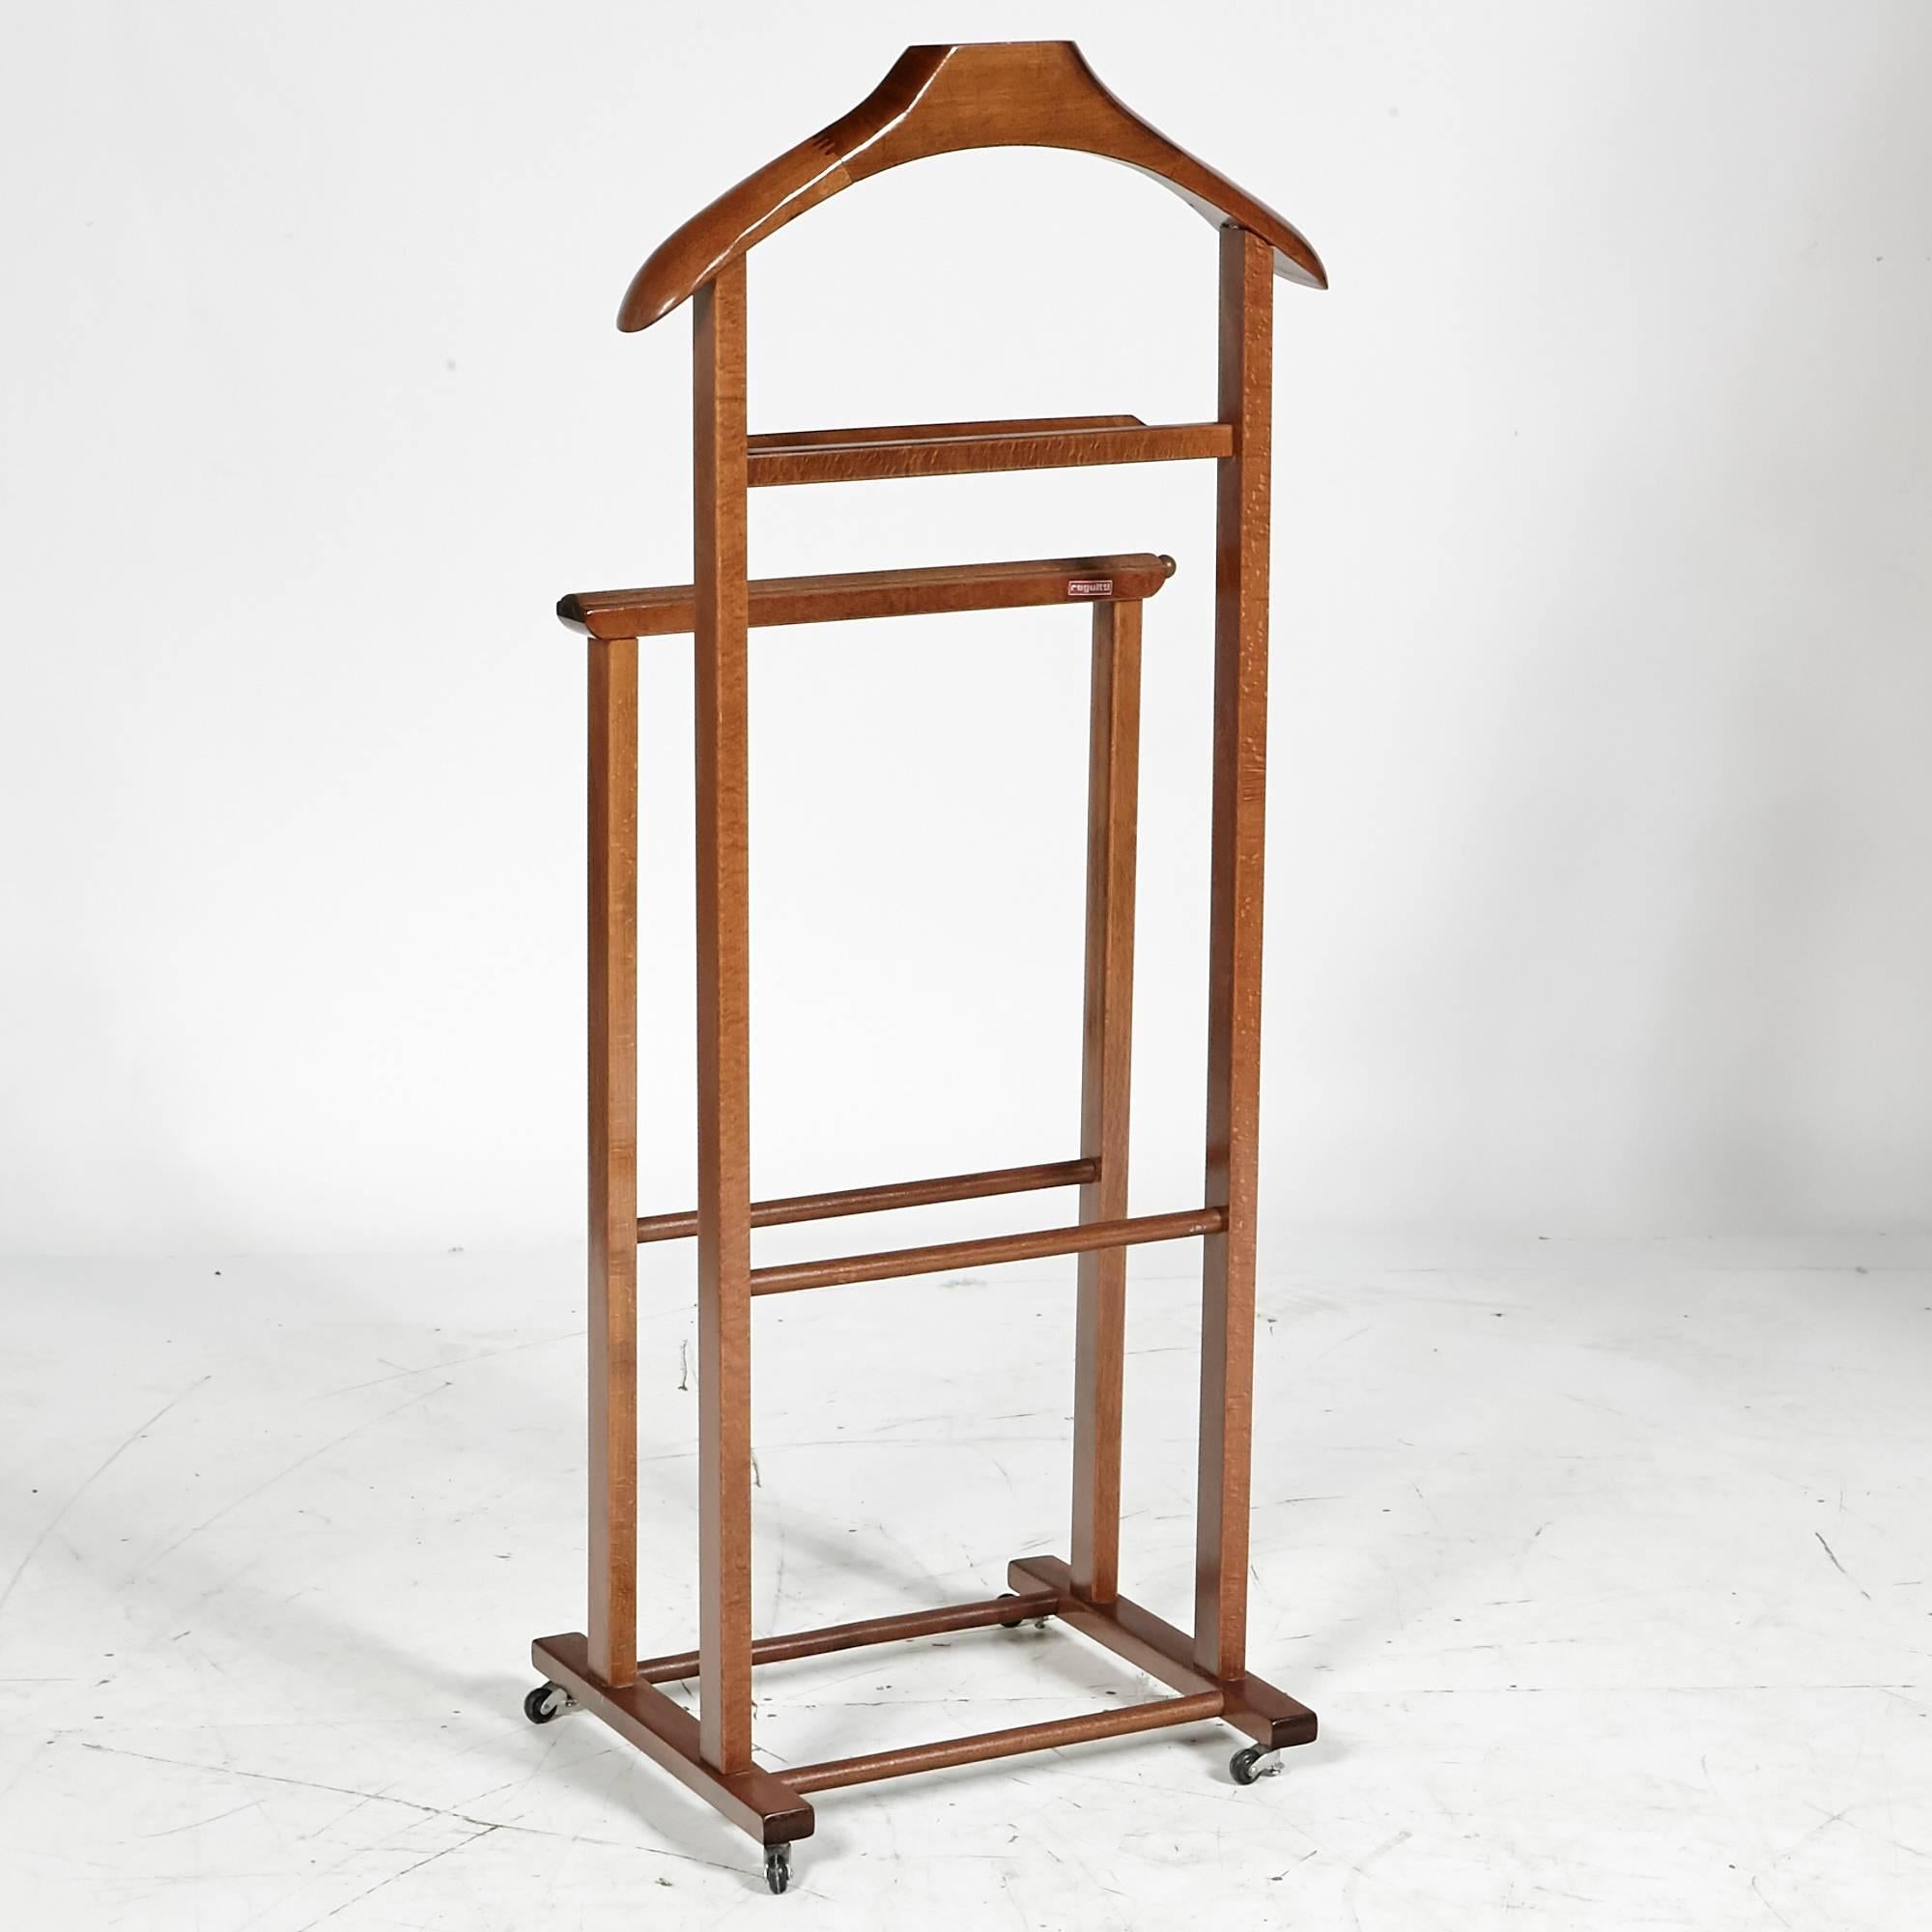 1950s double wood valet stand designed by Ico Parisi for Fratelli Reguitti, Italy. Valet is on castors. Marked.